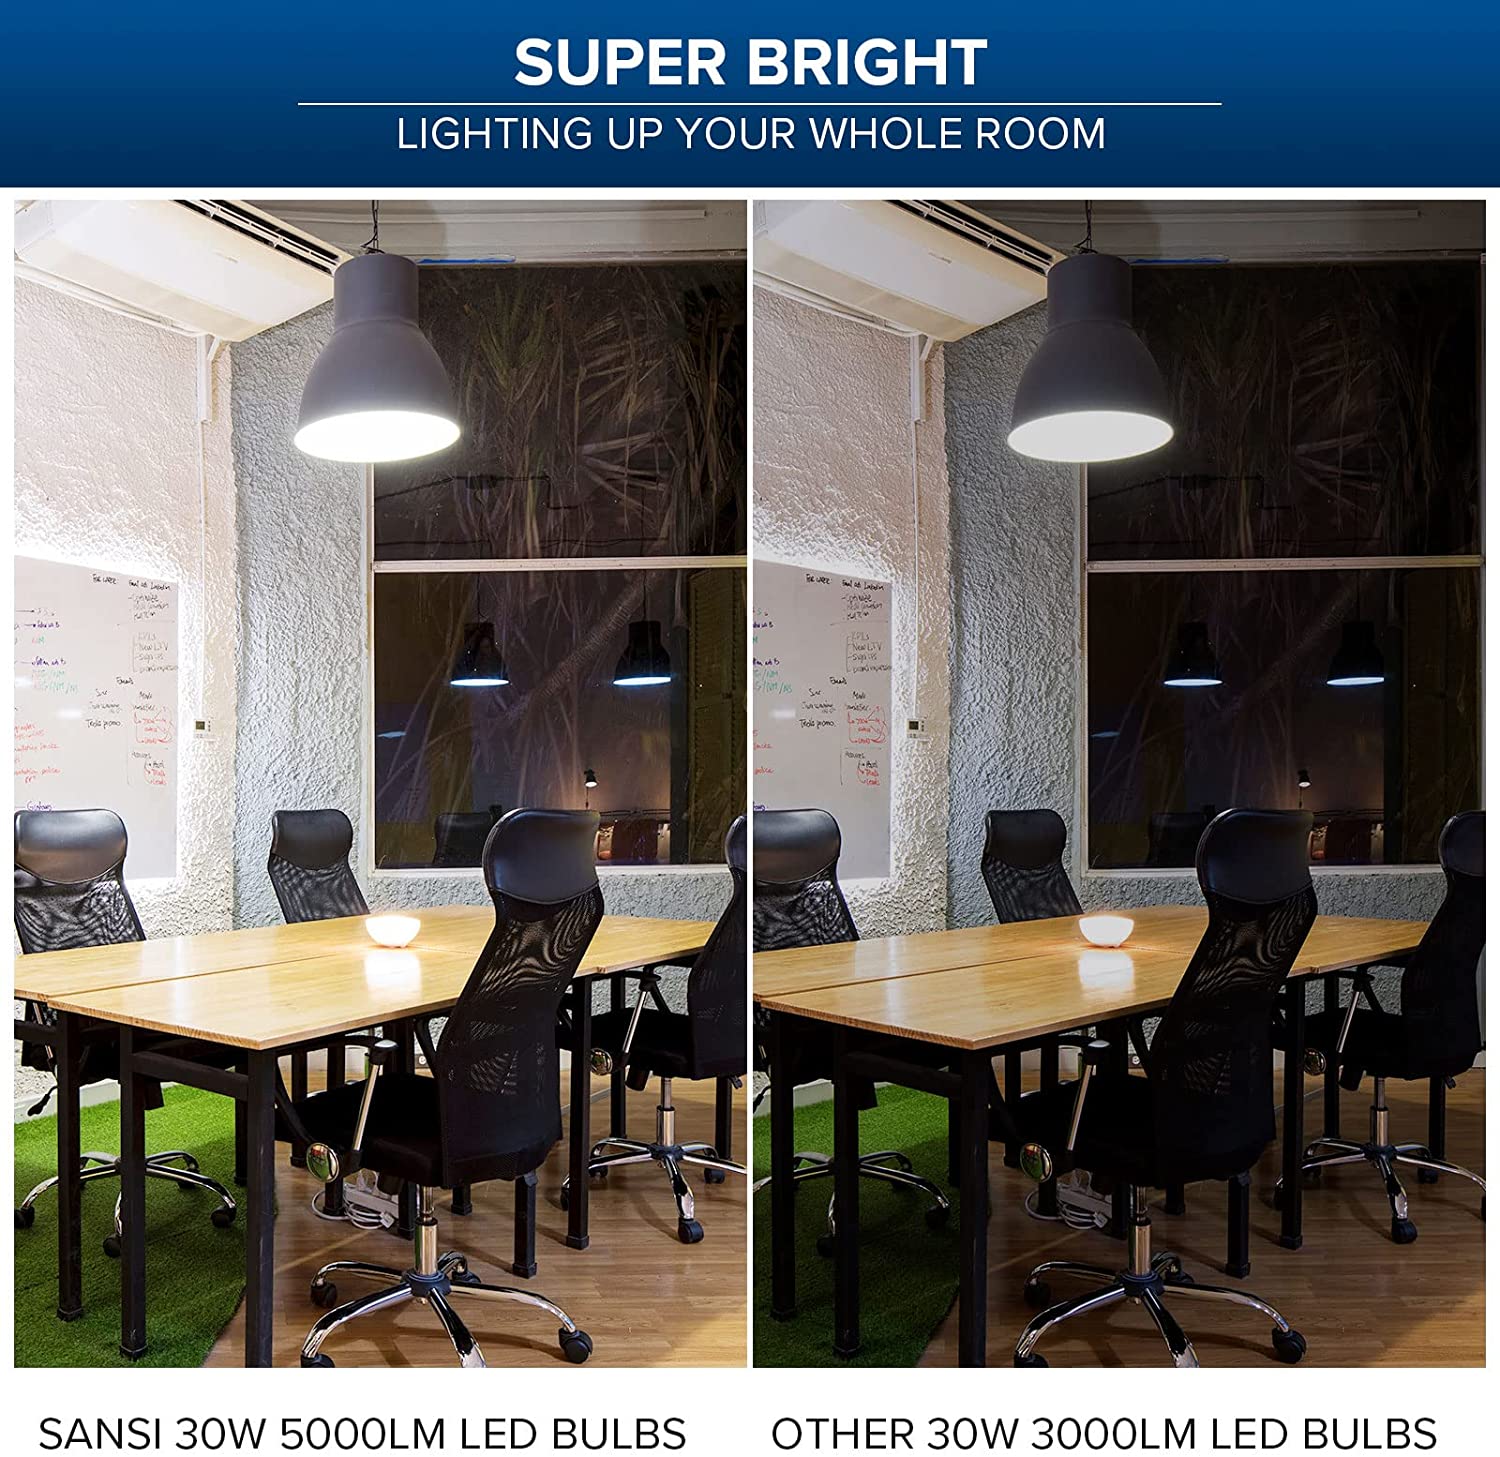 A21 30W LED Light Bulb is super bright，lighting up your whole room.